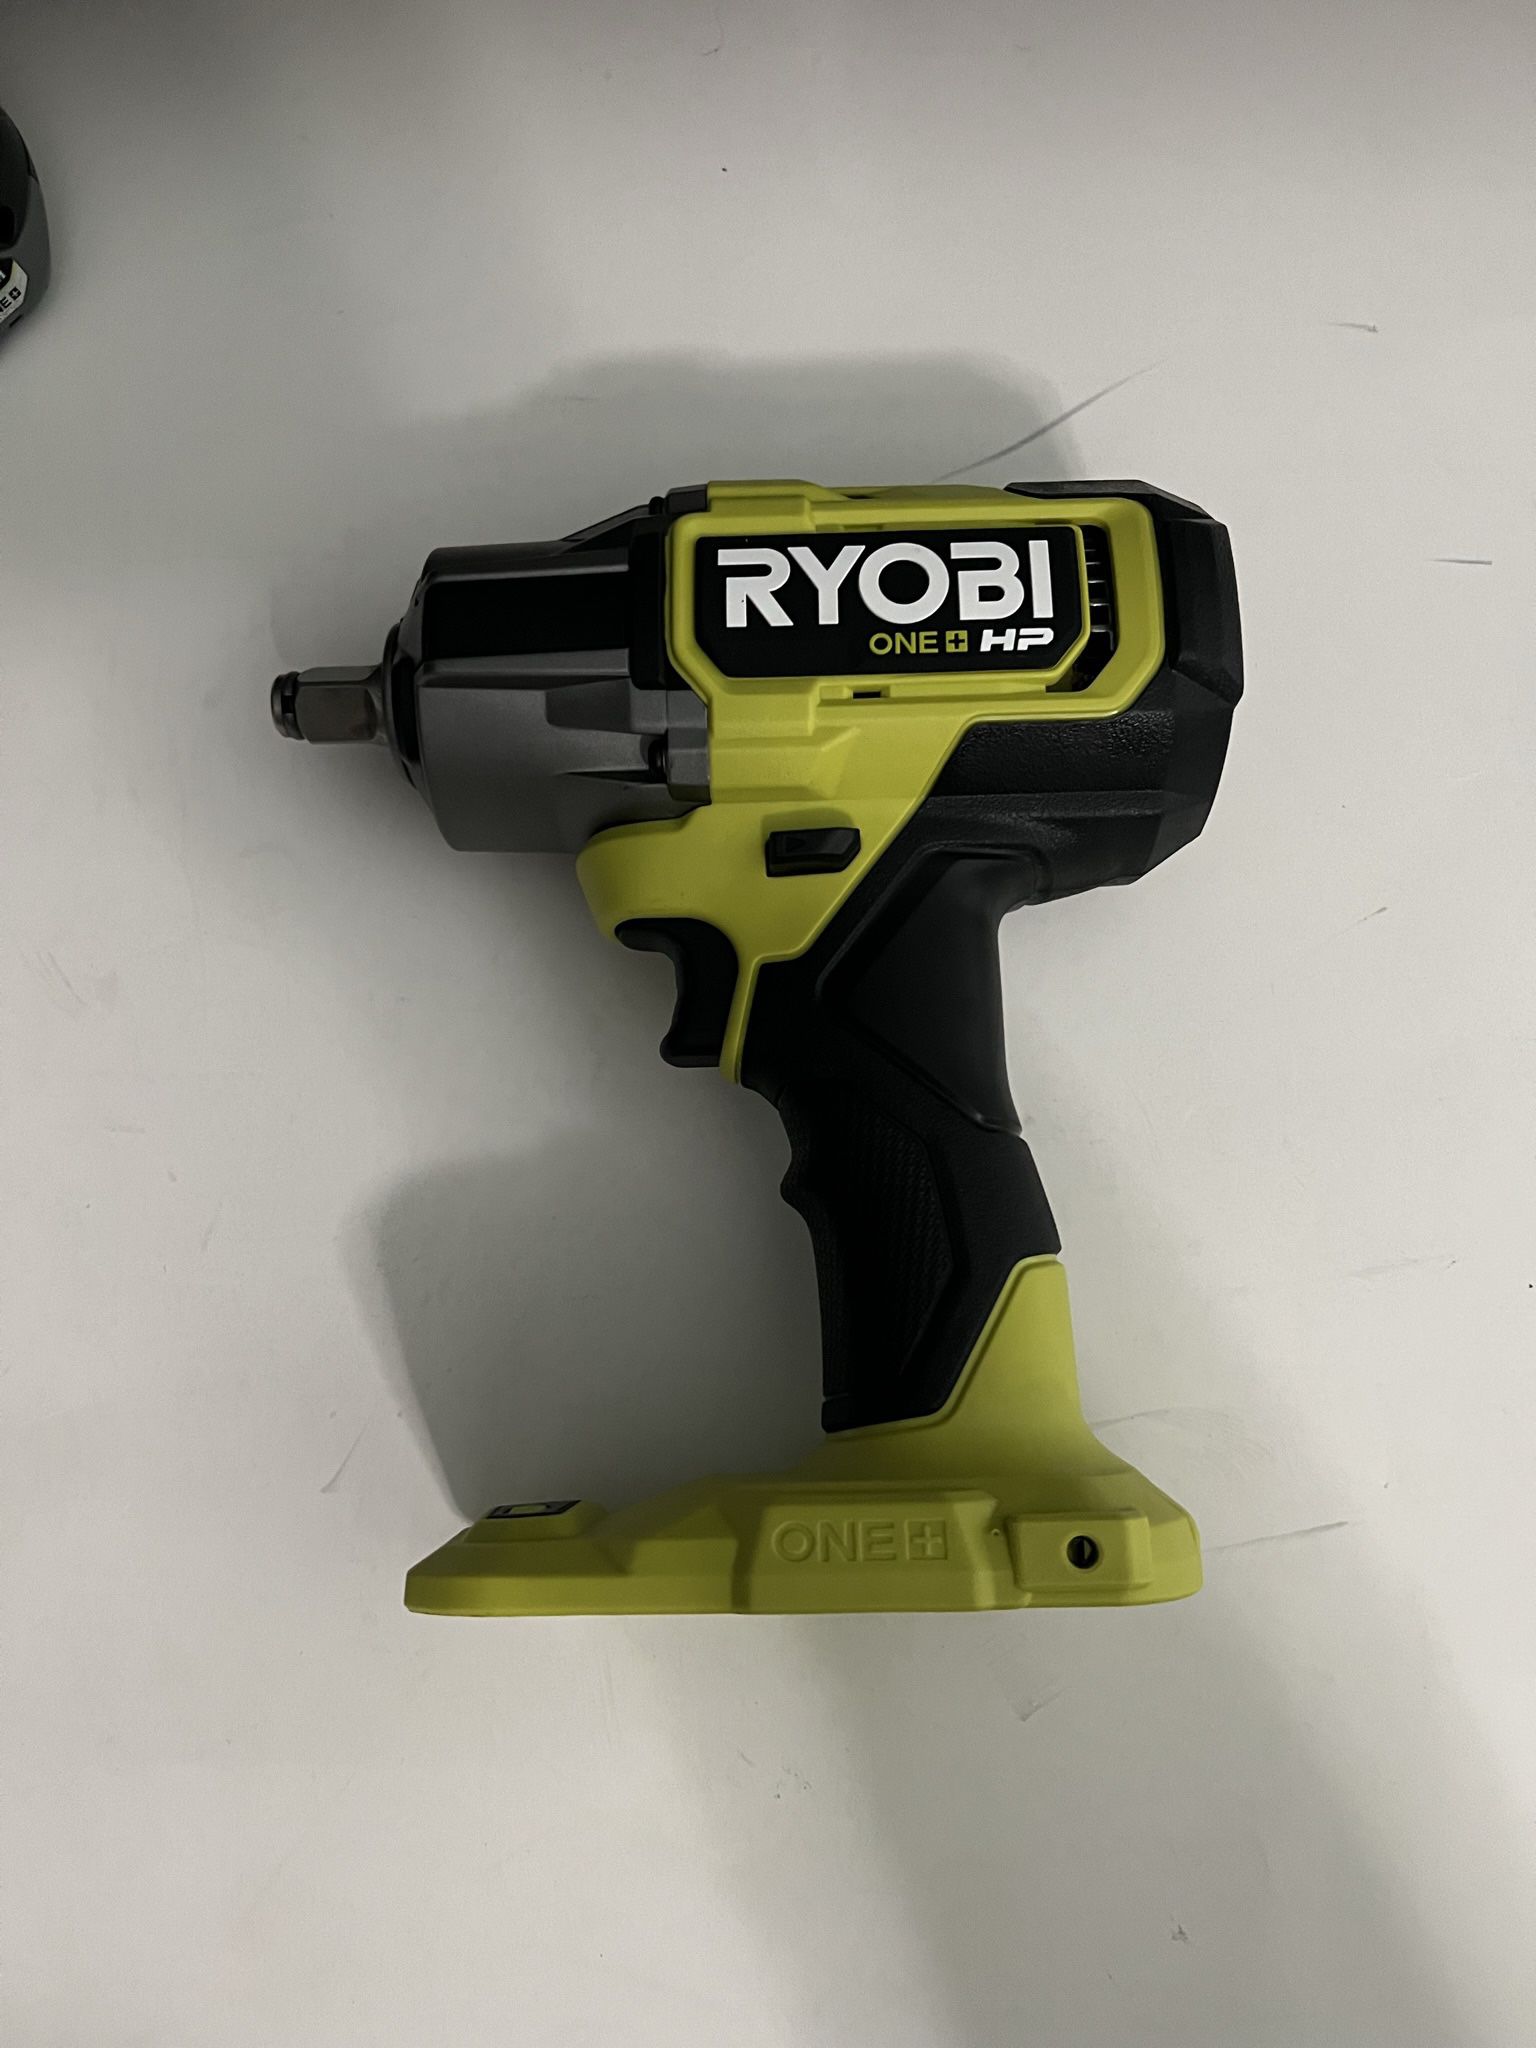 Ryobi ONE+ HP 18V Brushless Cordless 4-Mode 1/2 in. Impact Wrench (Tool Only)